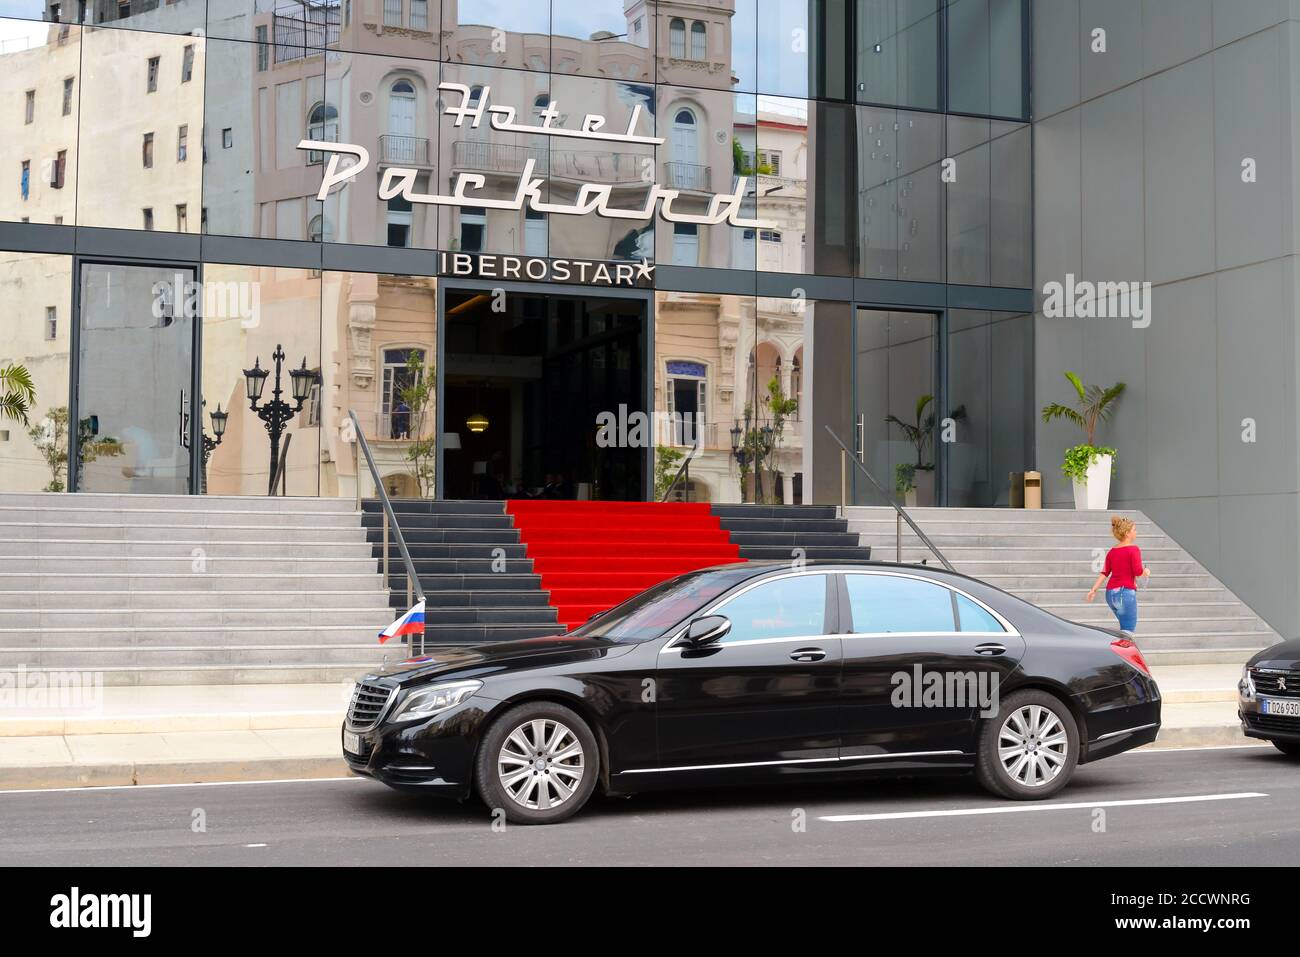 Russia official visit car with Valentina Matviyenko in Havana, Cuba in the city 500th anniversary. Russian official visit. Iberostar Packard Hotel. Stock Photo